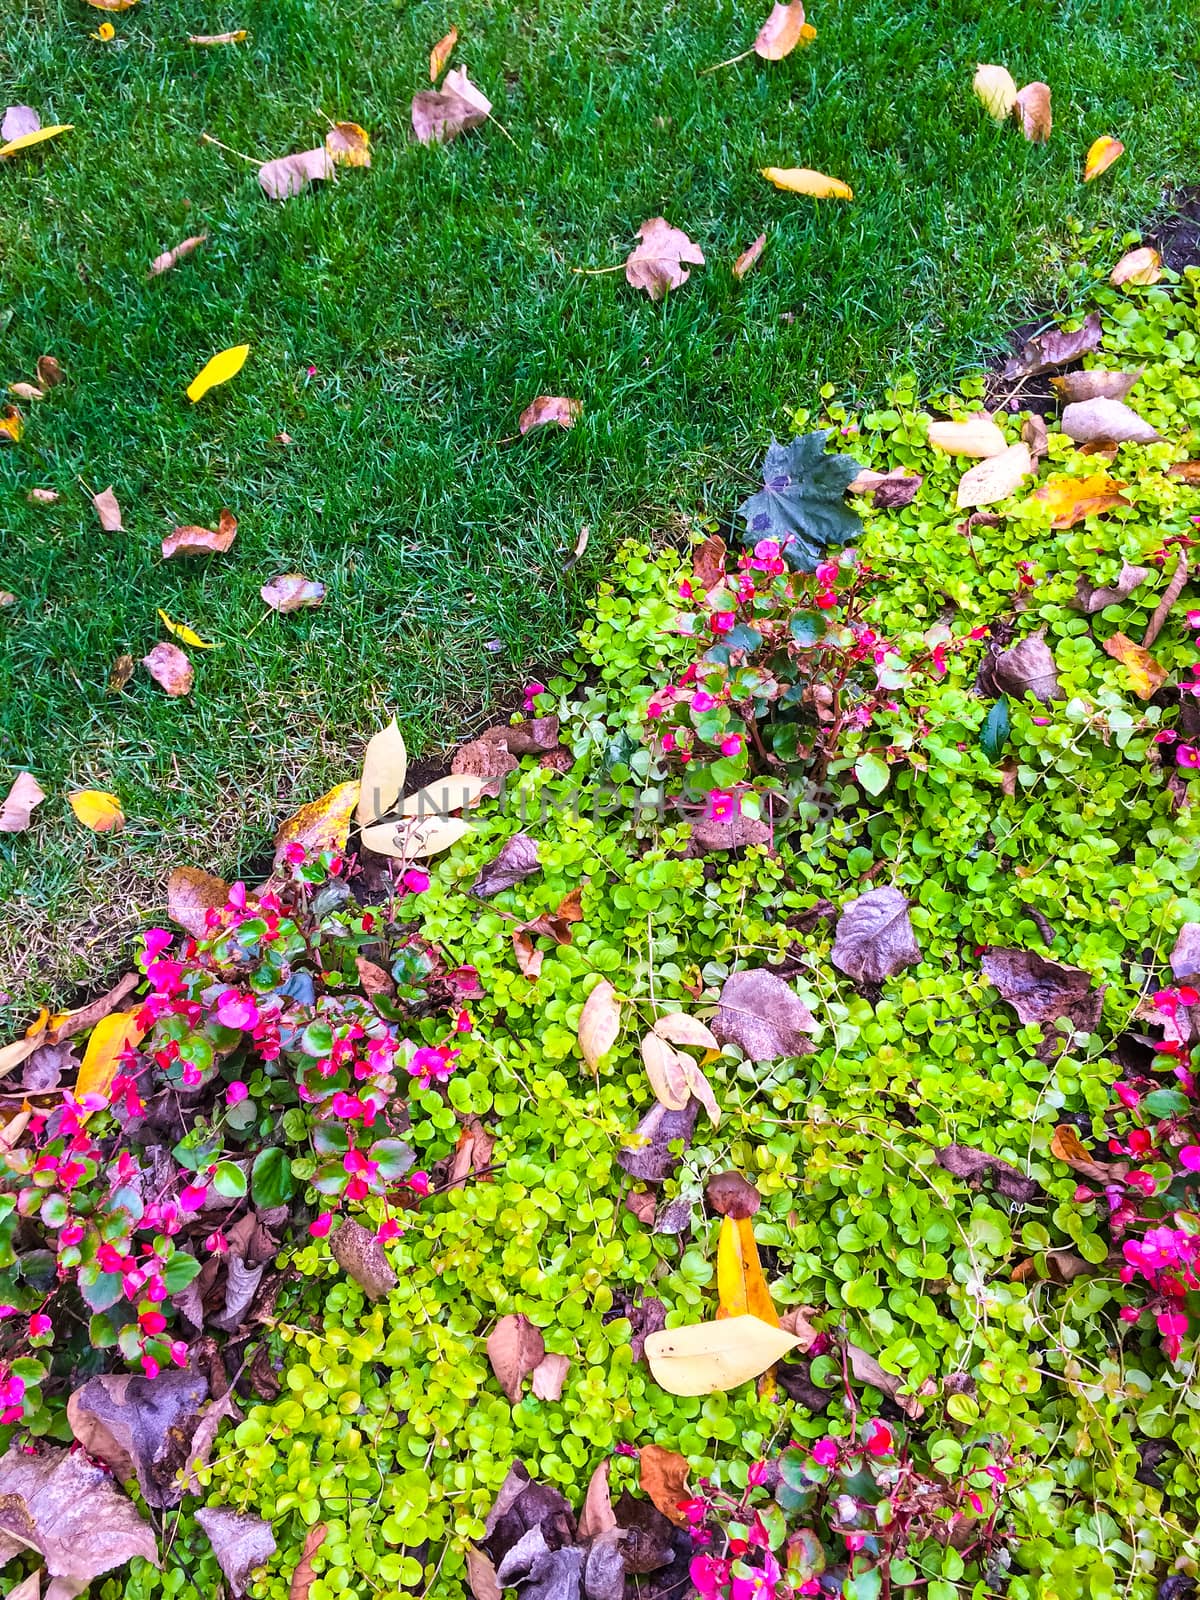 Autumn leaves in a garden with colorful plants and flowers.